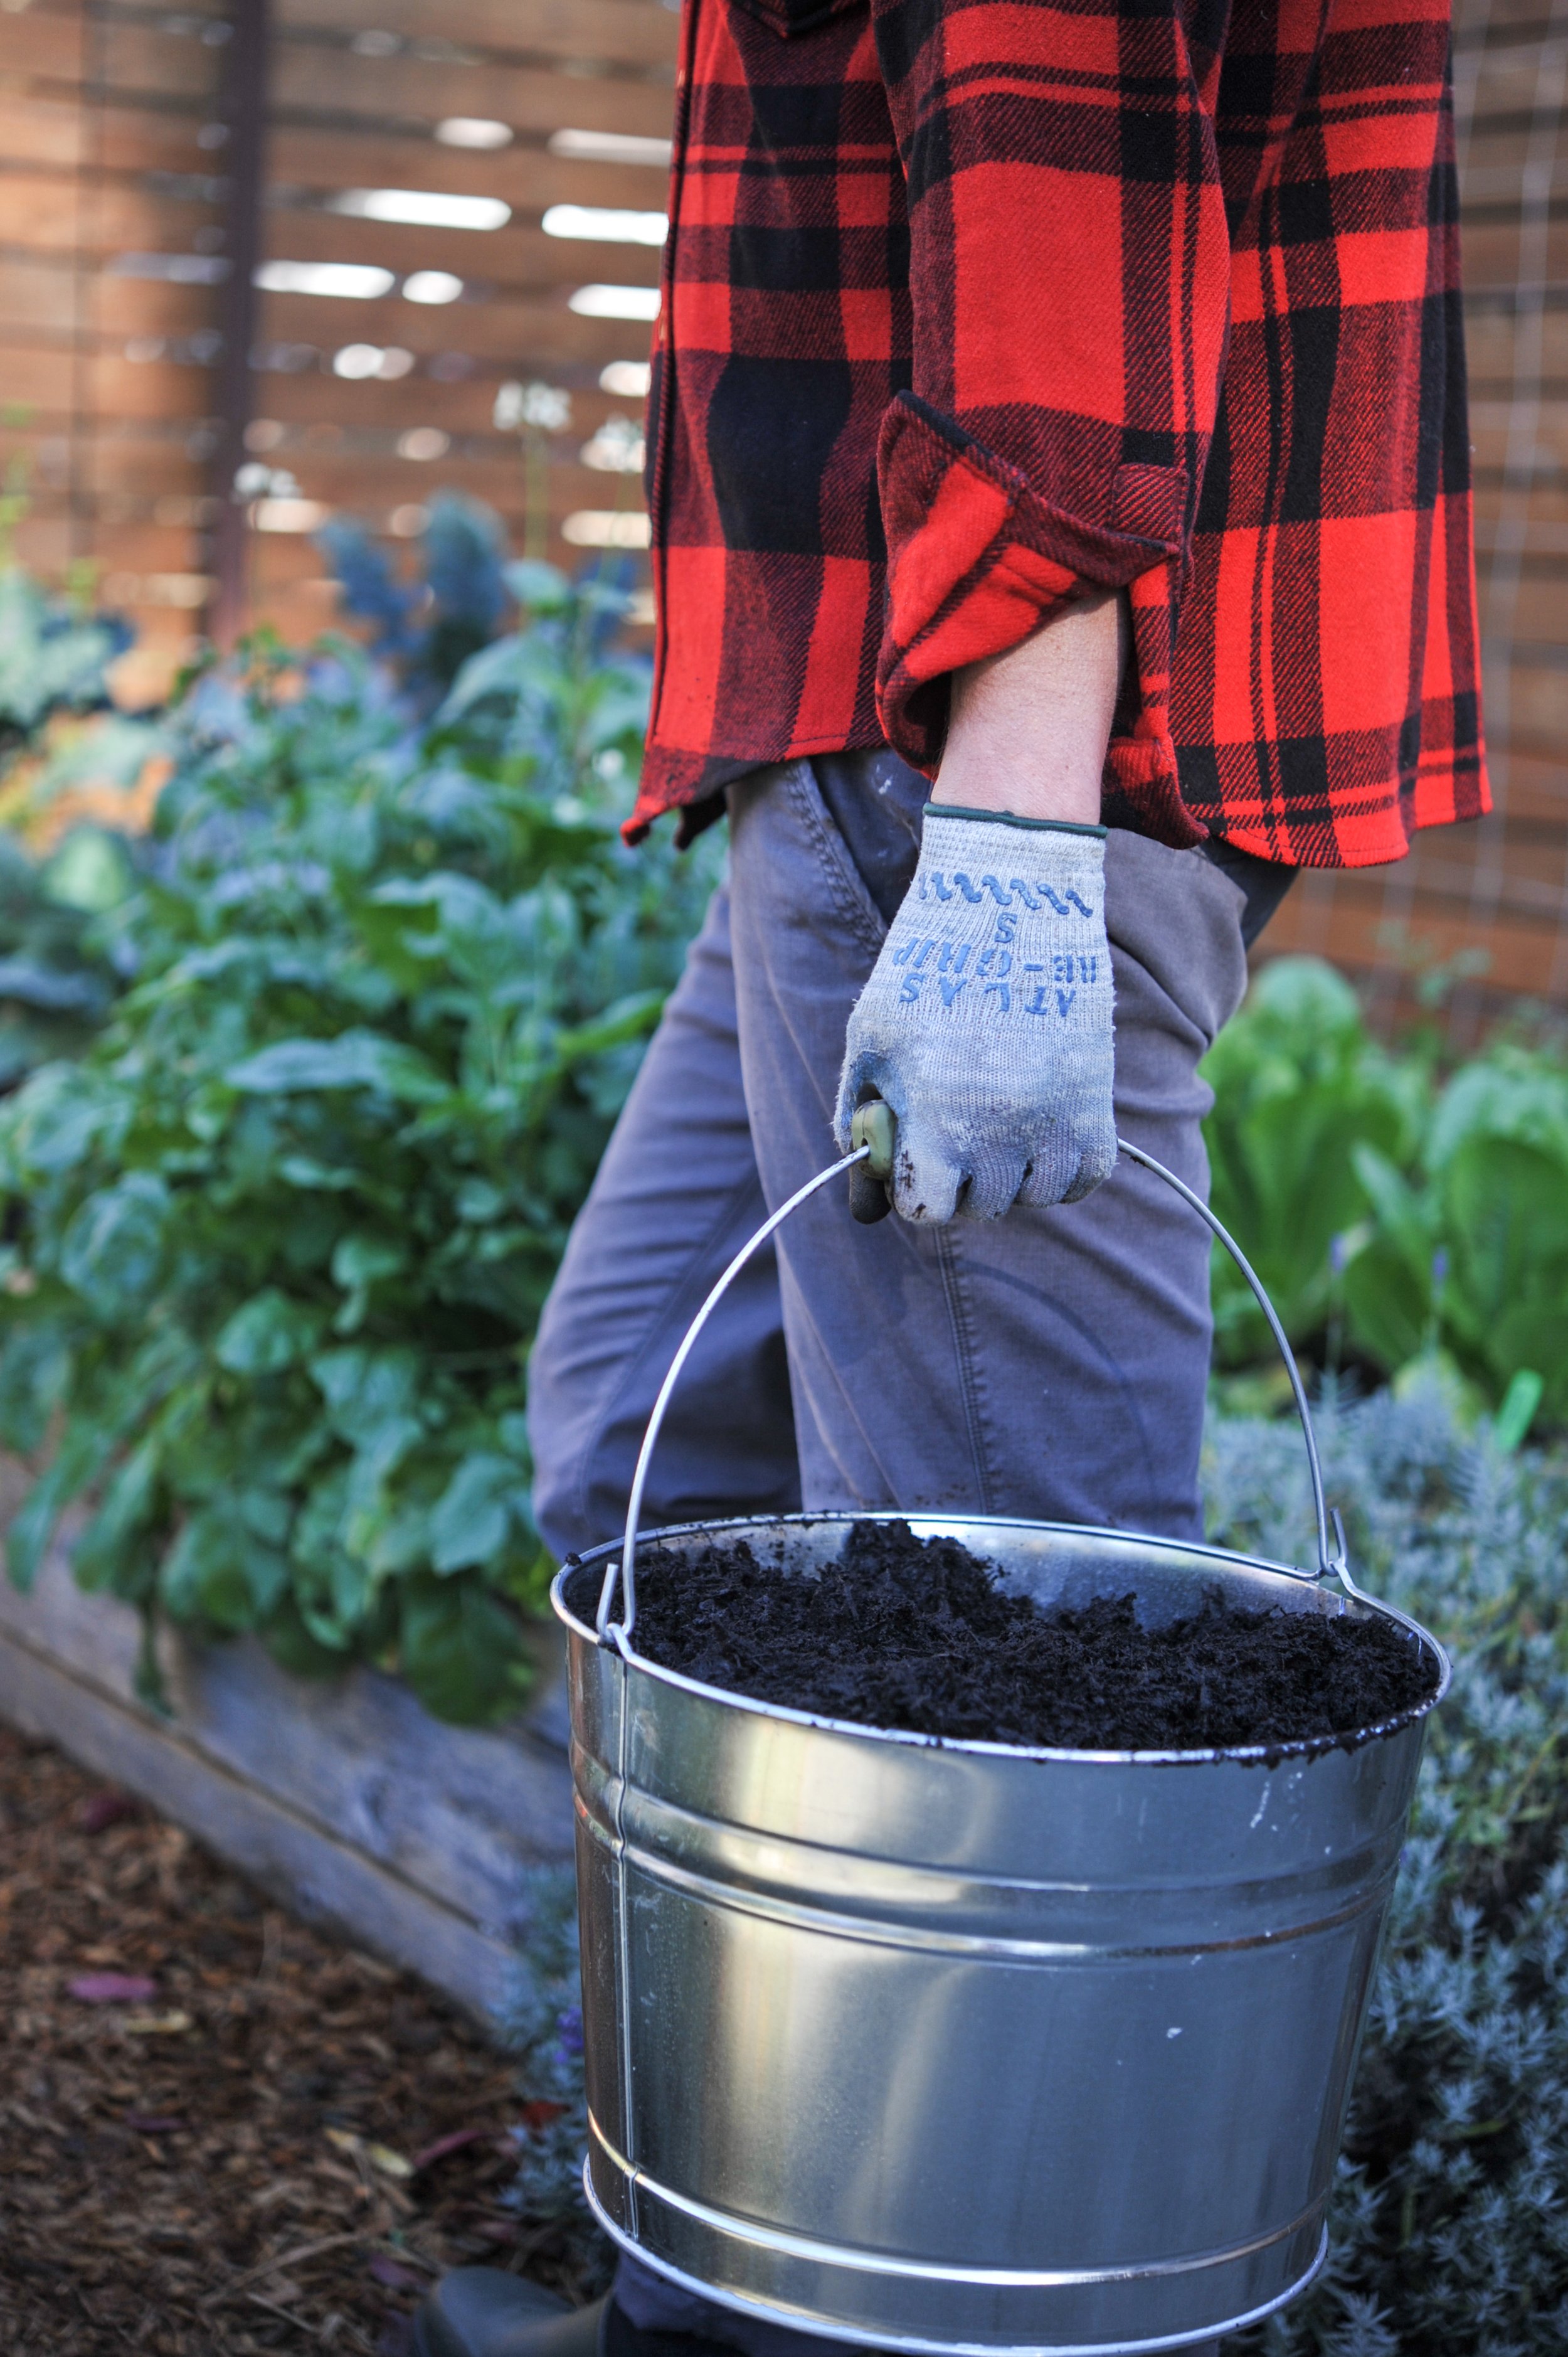 Behren’s large Comfort Grip handles ergonomic design gives our hands a break when hauling buckets of compost all day.